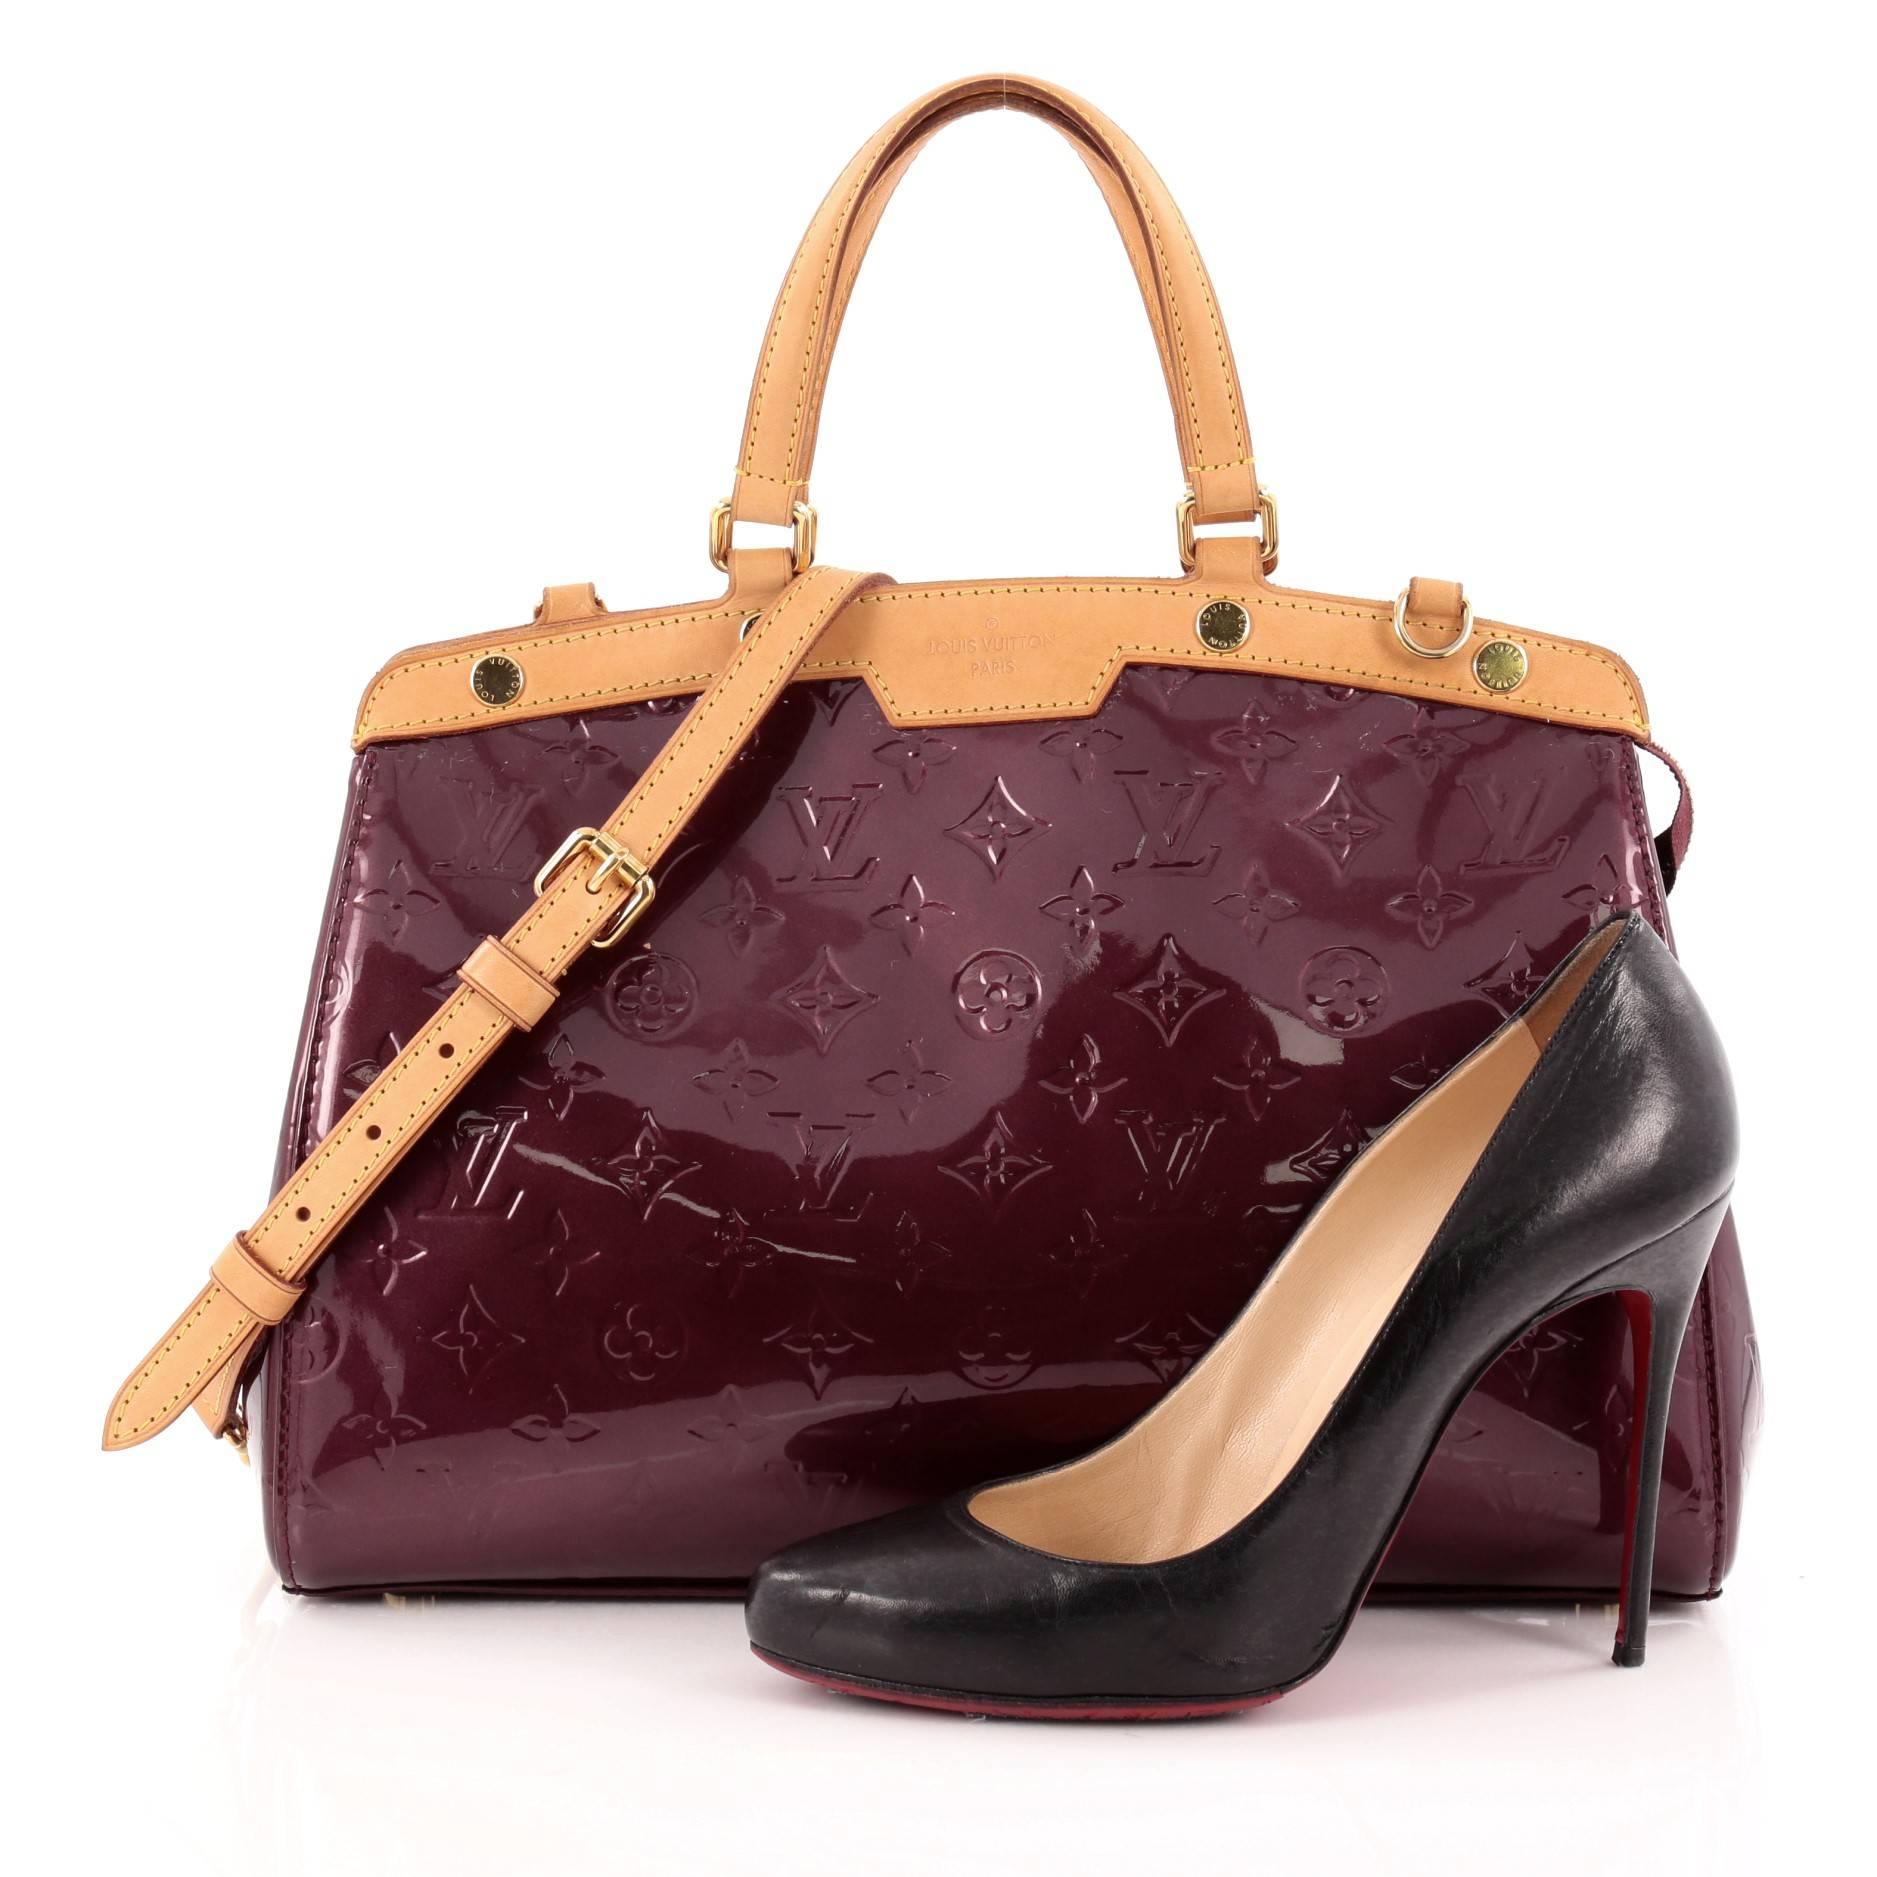 This authentic Louis Vuitton Brea Handbag Monogram Vernis MM is a staple for an everyday casual look. Crafted in rouge fauviste monogram vernis leather with cowhide leather trims, this structured yet feminine tote features dual flat handles,